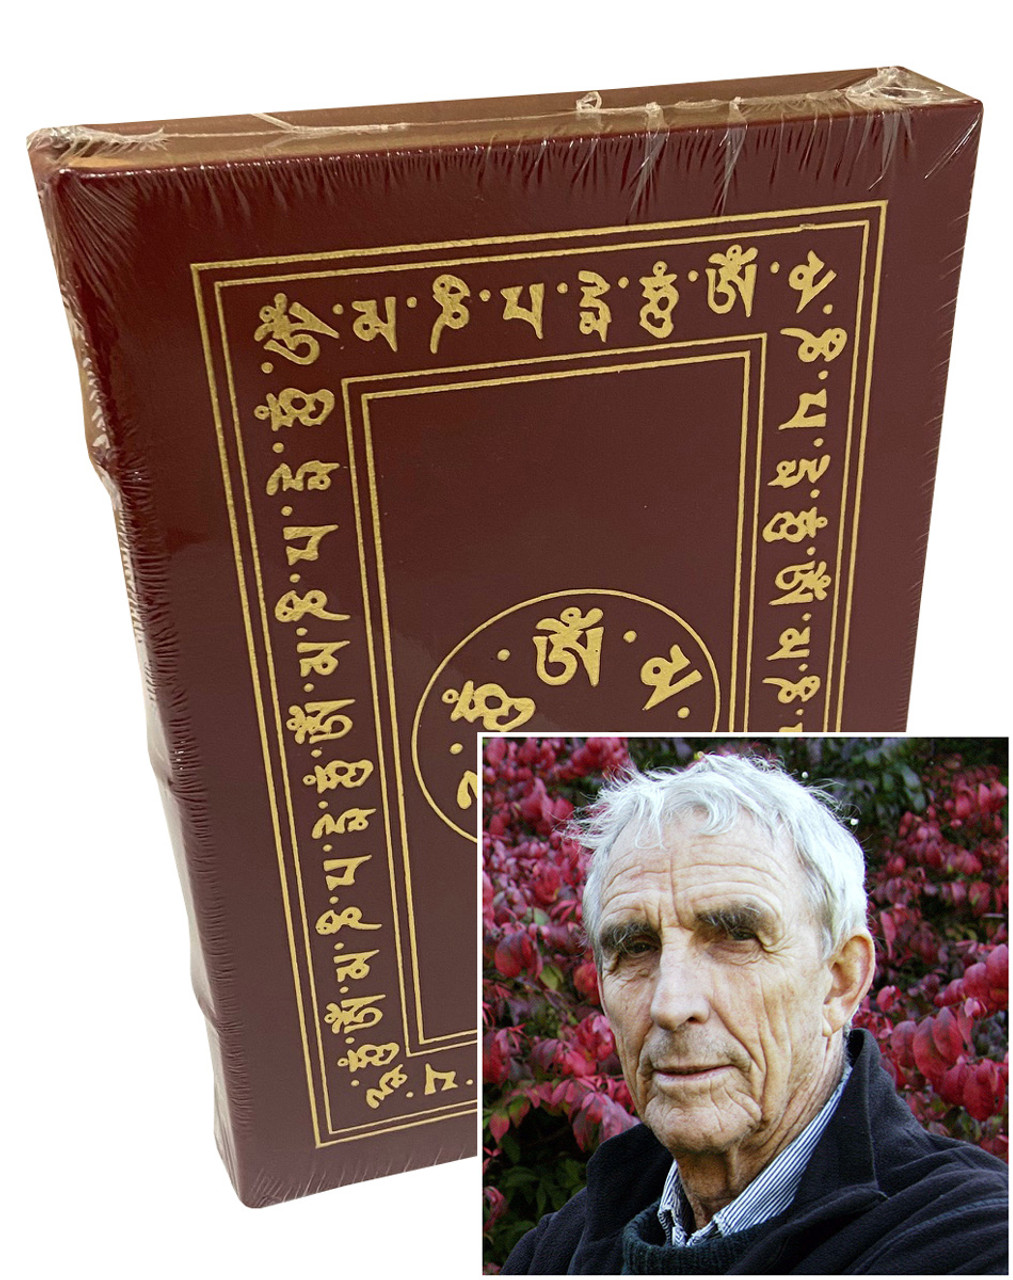 Peter Matthiessen "The Snow Leopard" Signed Limited Edition, Leather Bound Collector's Edition w/COA [Sealed]